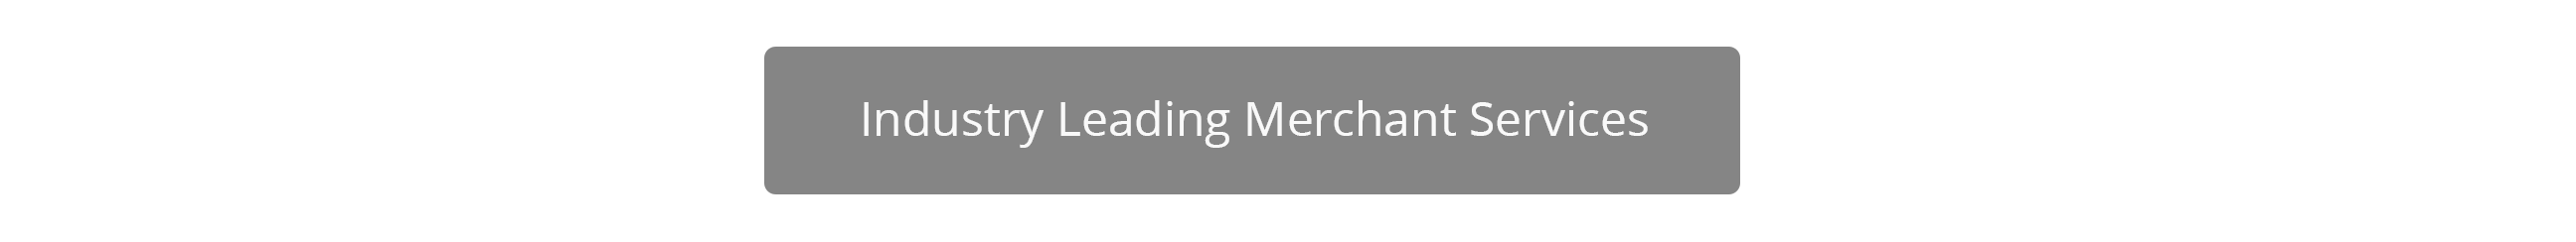 Industry Leading Merchant Services